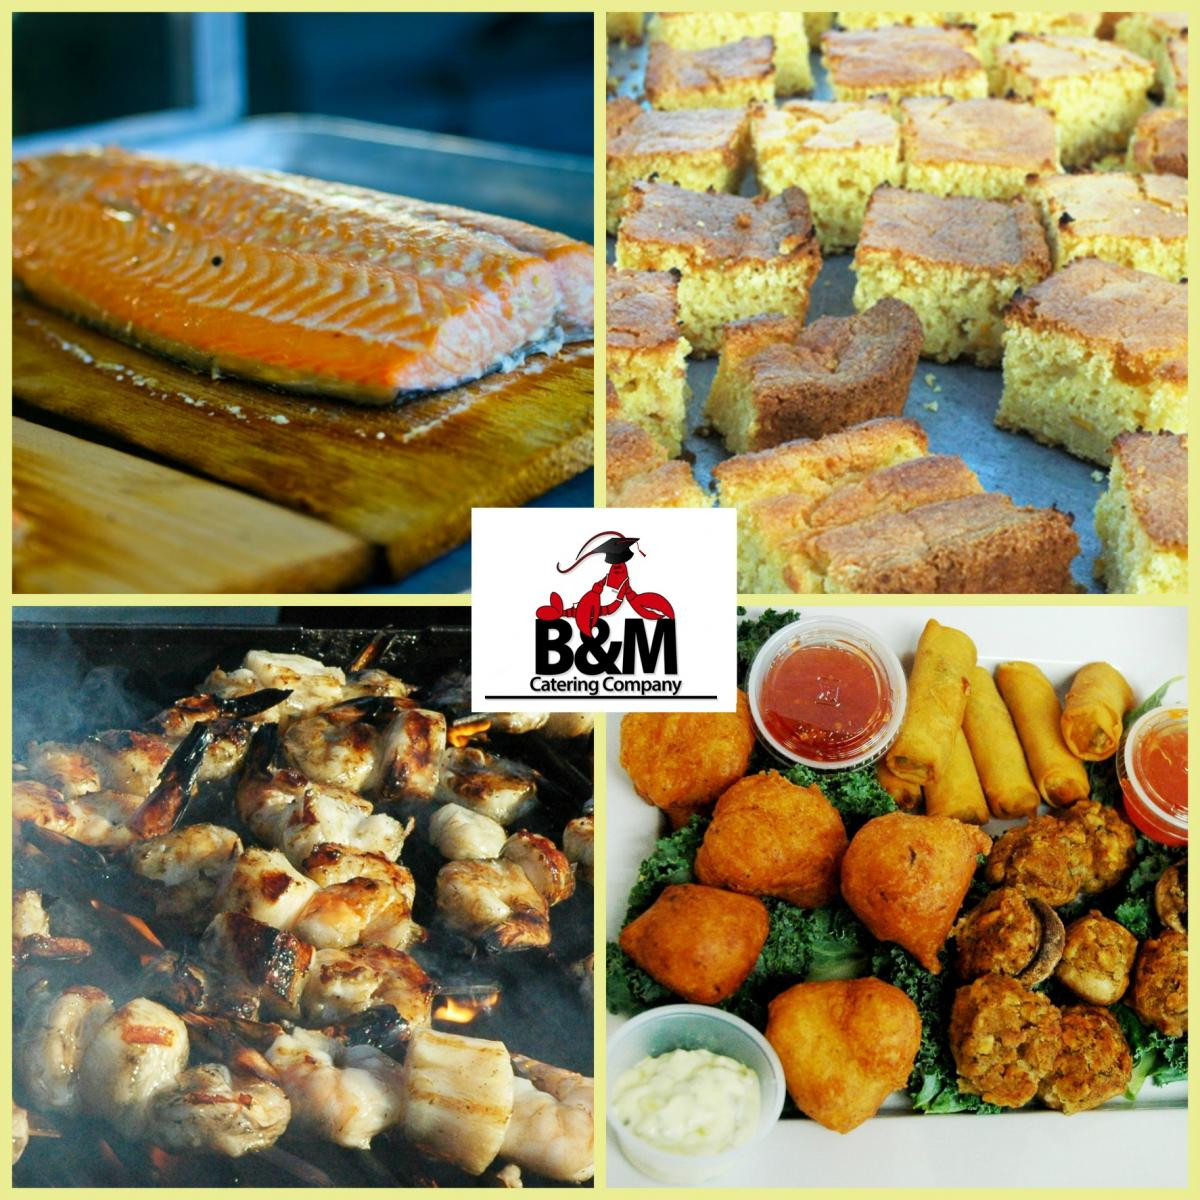 Backyard Graduation Party Food Ideas
 Graduation Parties Made Easy with B&M Catering